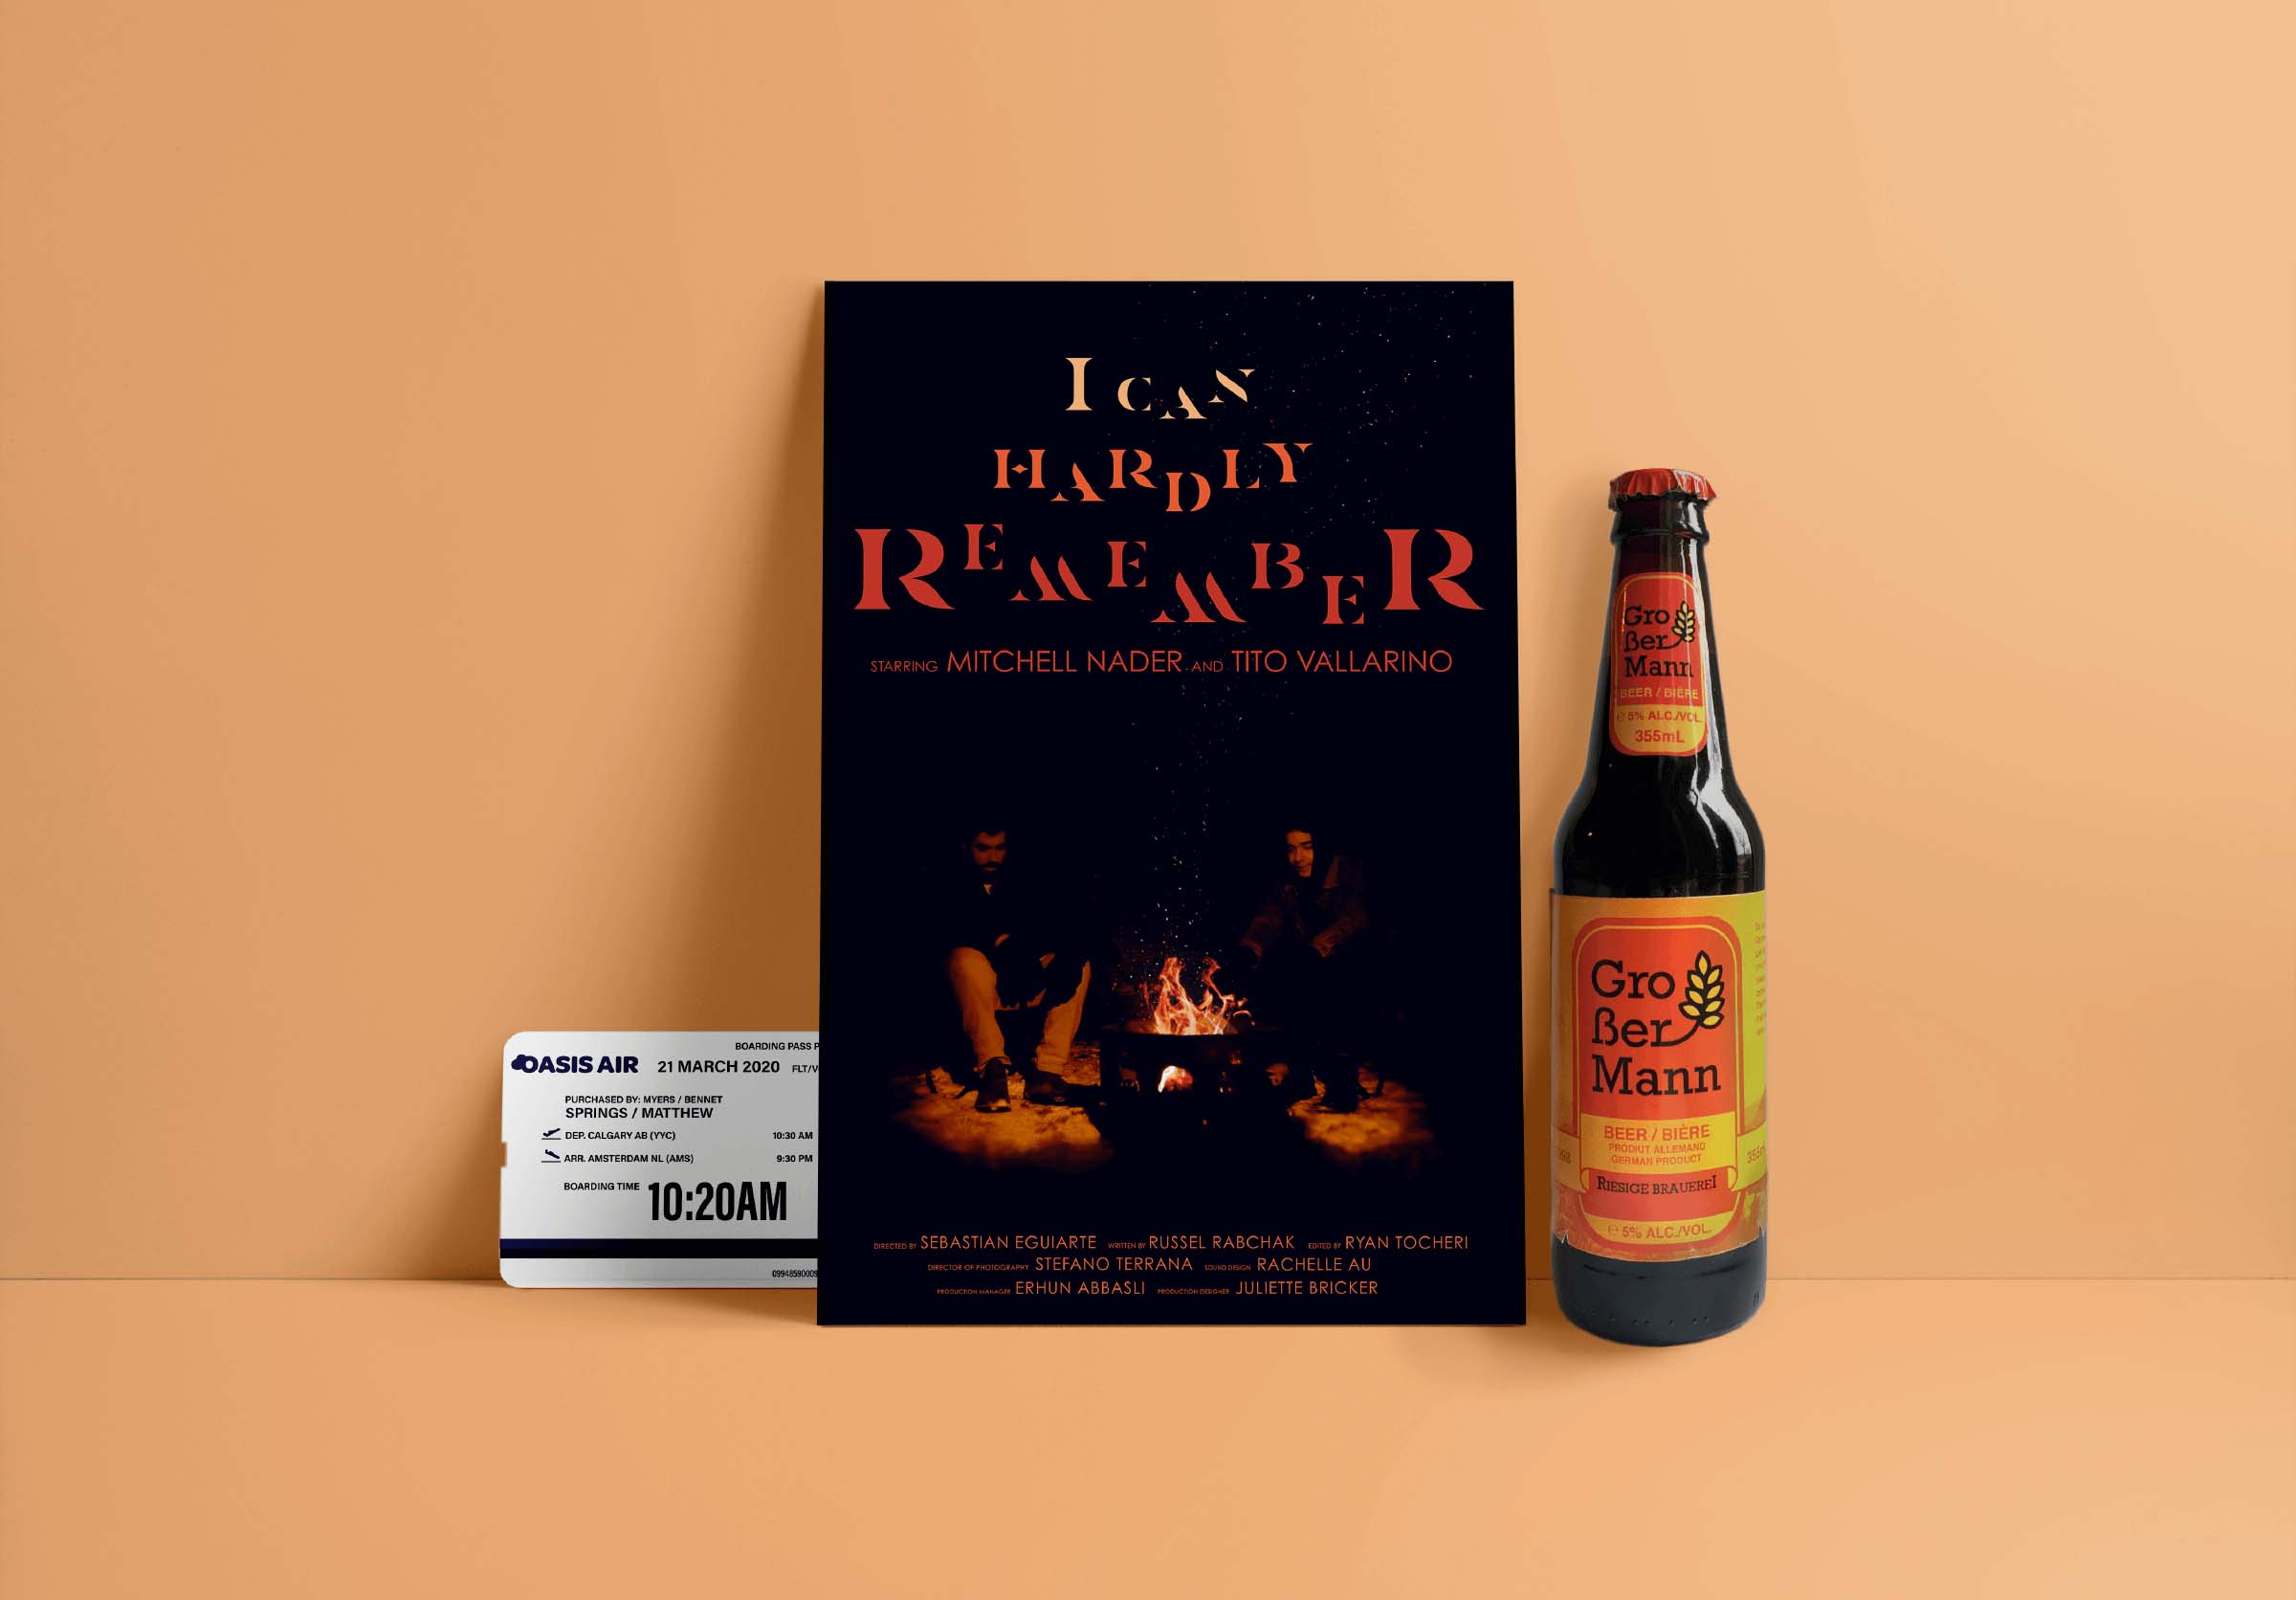 Dark movie poster of two guys sitting around a campfire and a plane ticket and beer bottle beside it